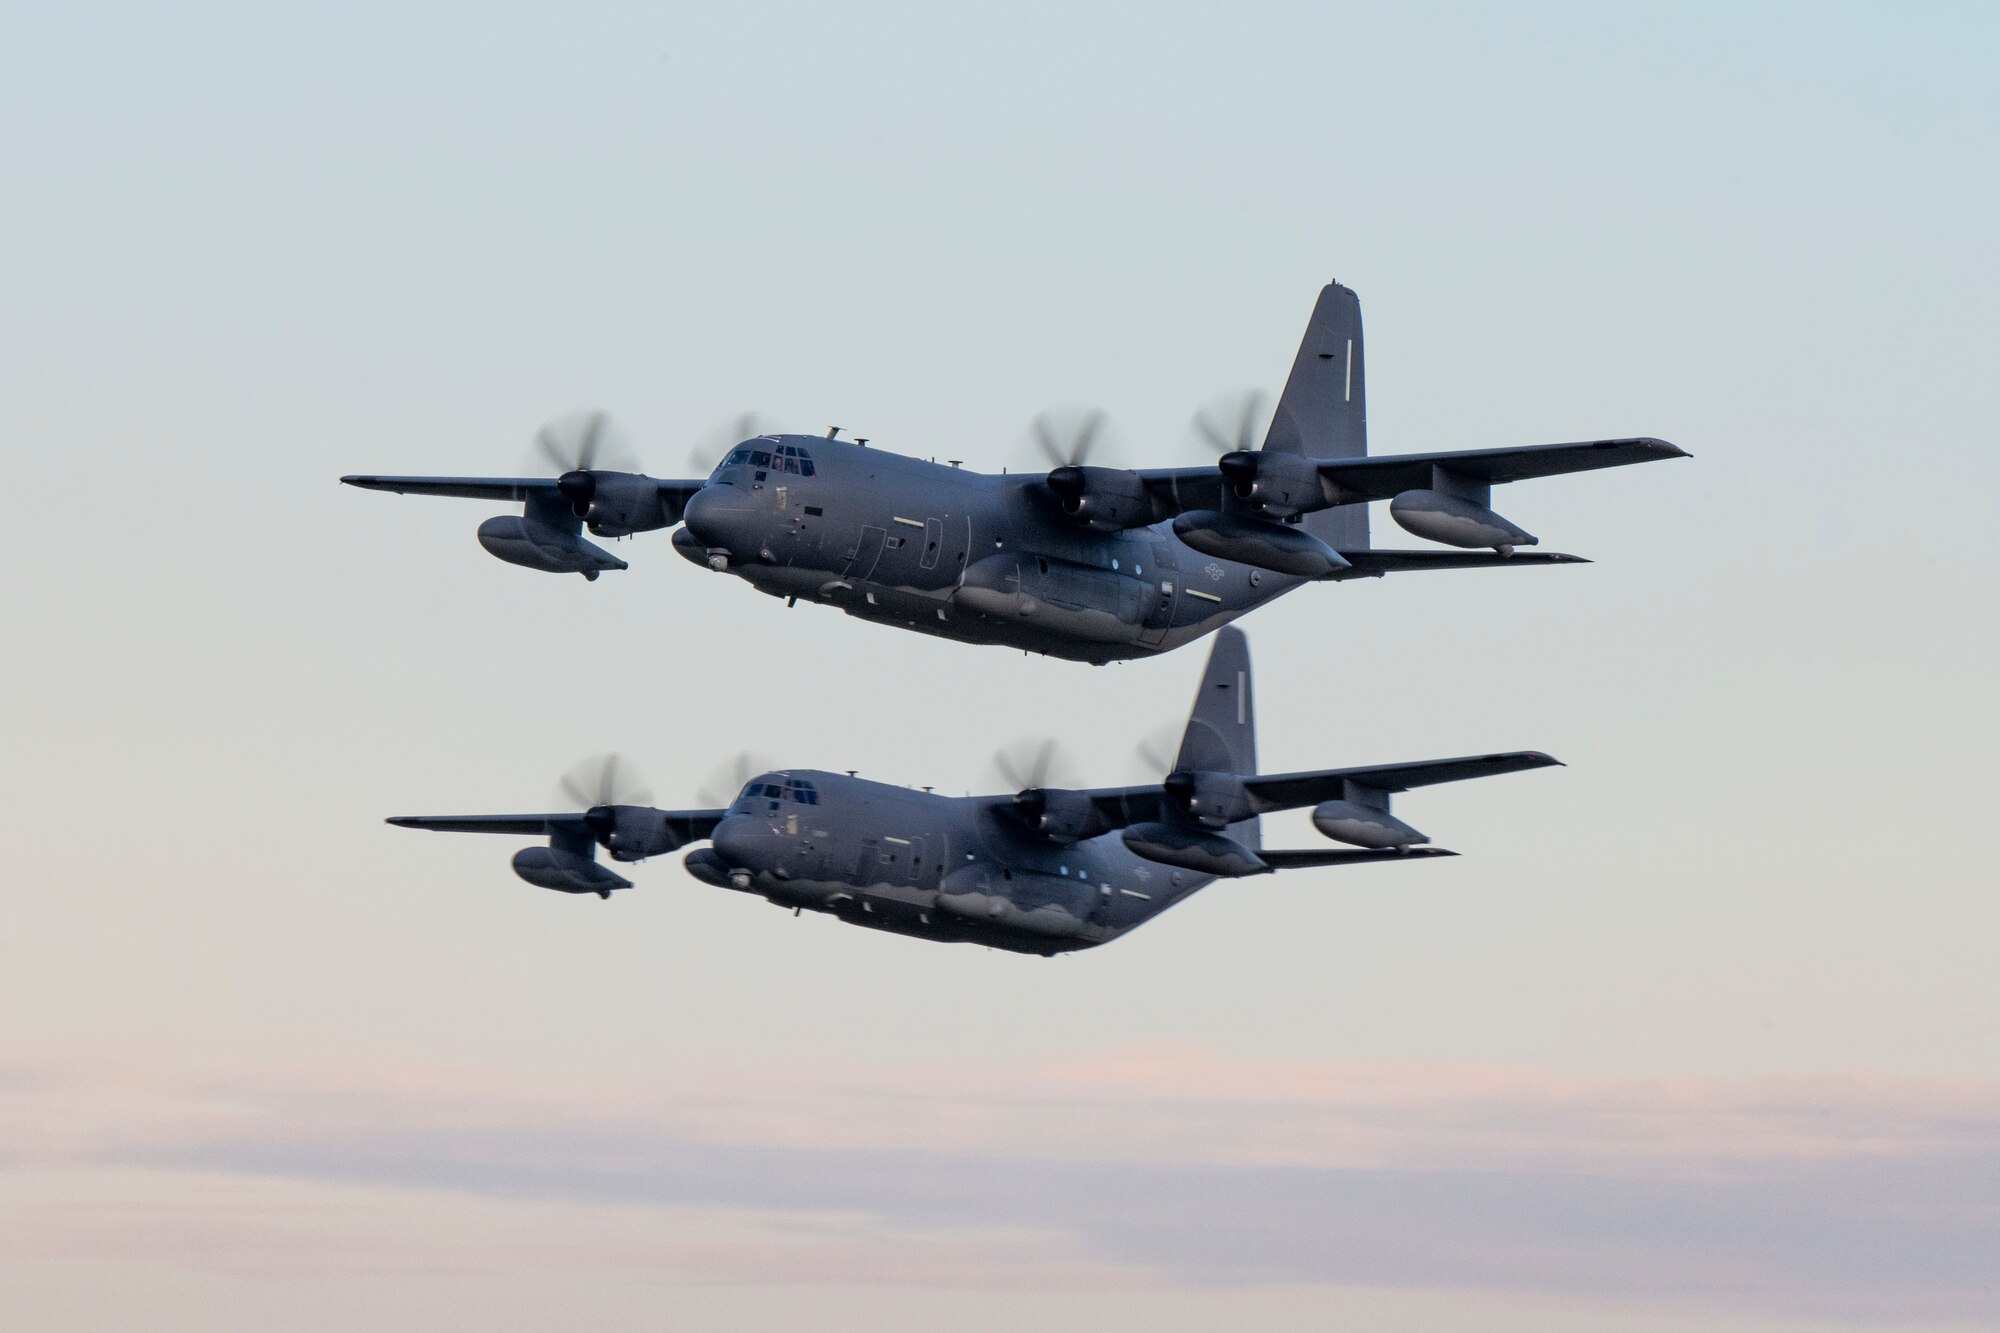 Two MC-130J Commando II aircraft from the 1st Special Operations Wing take off from Hurlburt Field, Florida, Jul. 6, 2023. The 1st Special Operation Wing, especially postured for rapid intervention in any crisis or conflict, launched two MC-130Js in support of U.S. Southern Command to enhance collective readiness, capability and contribute to regional security in the Western Hemisphere.